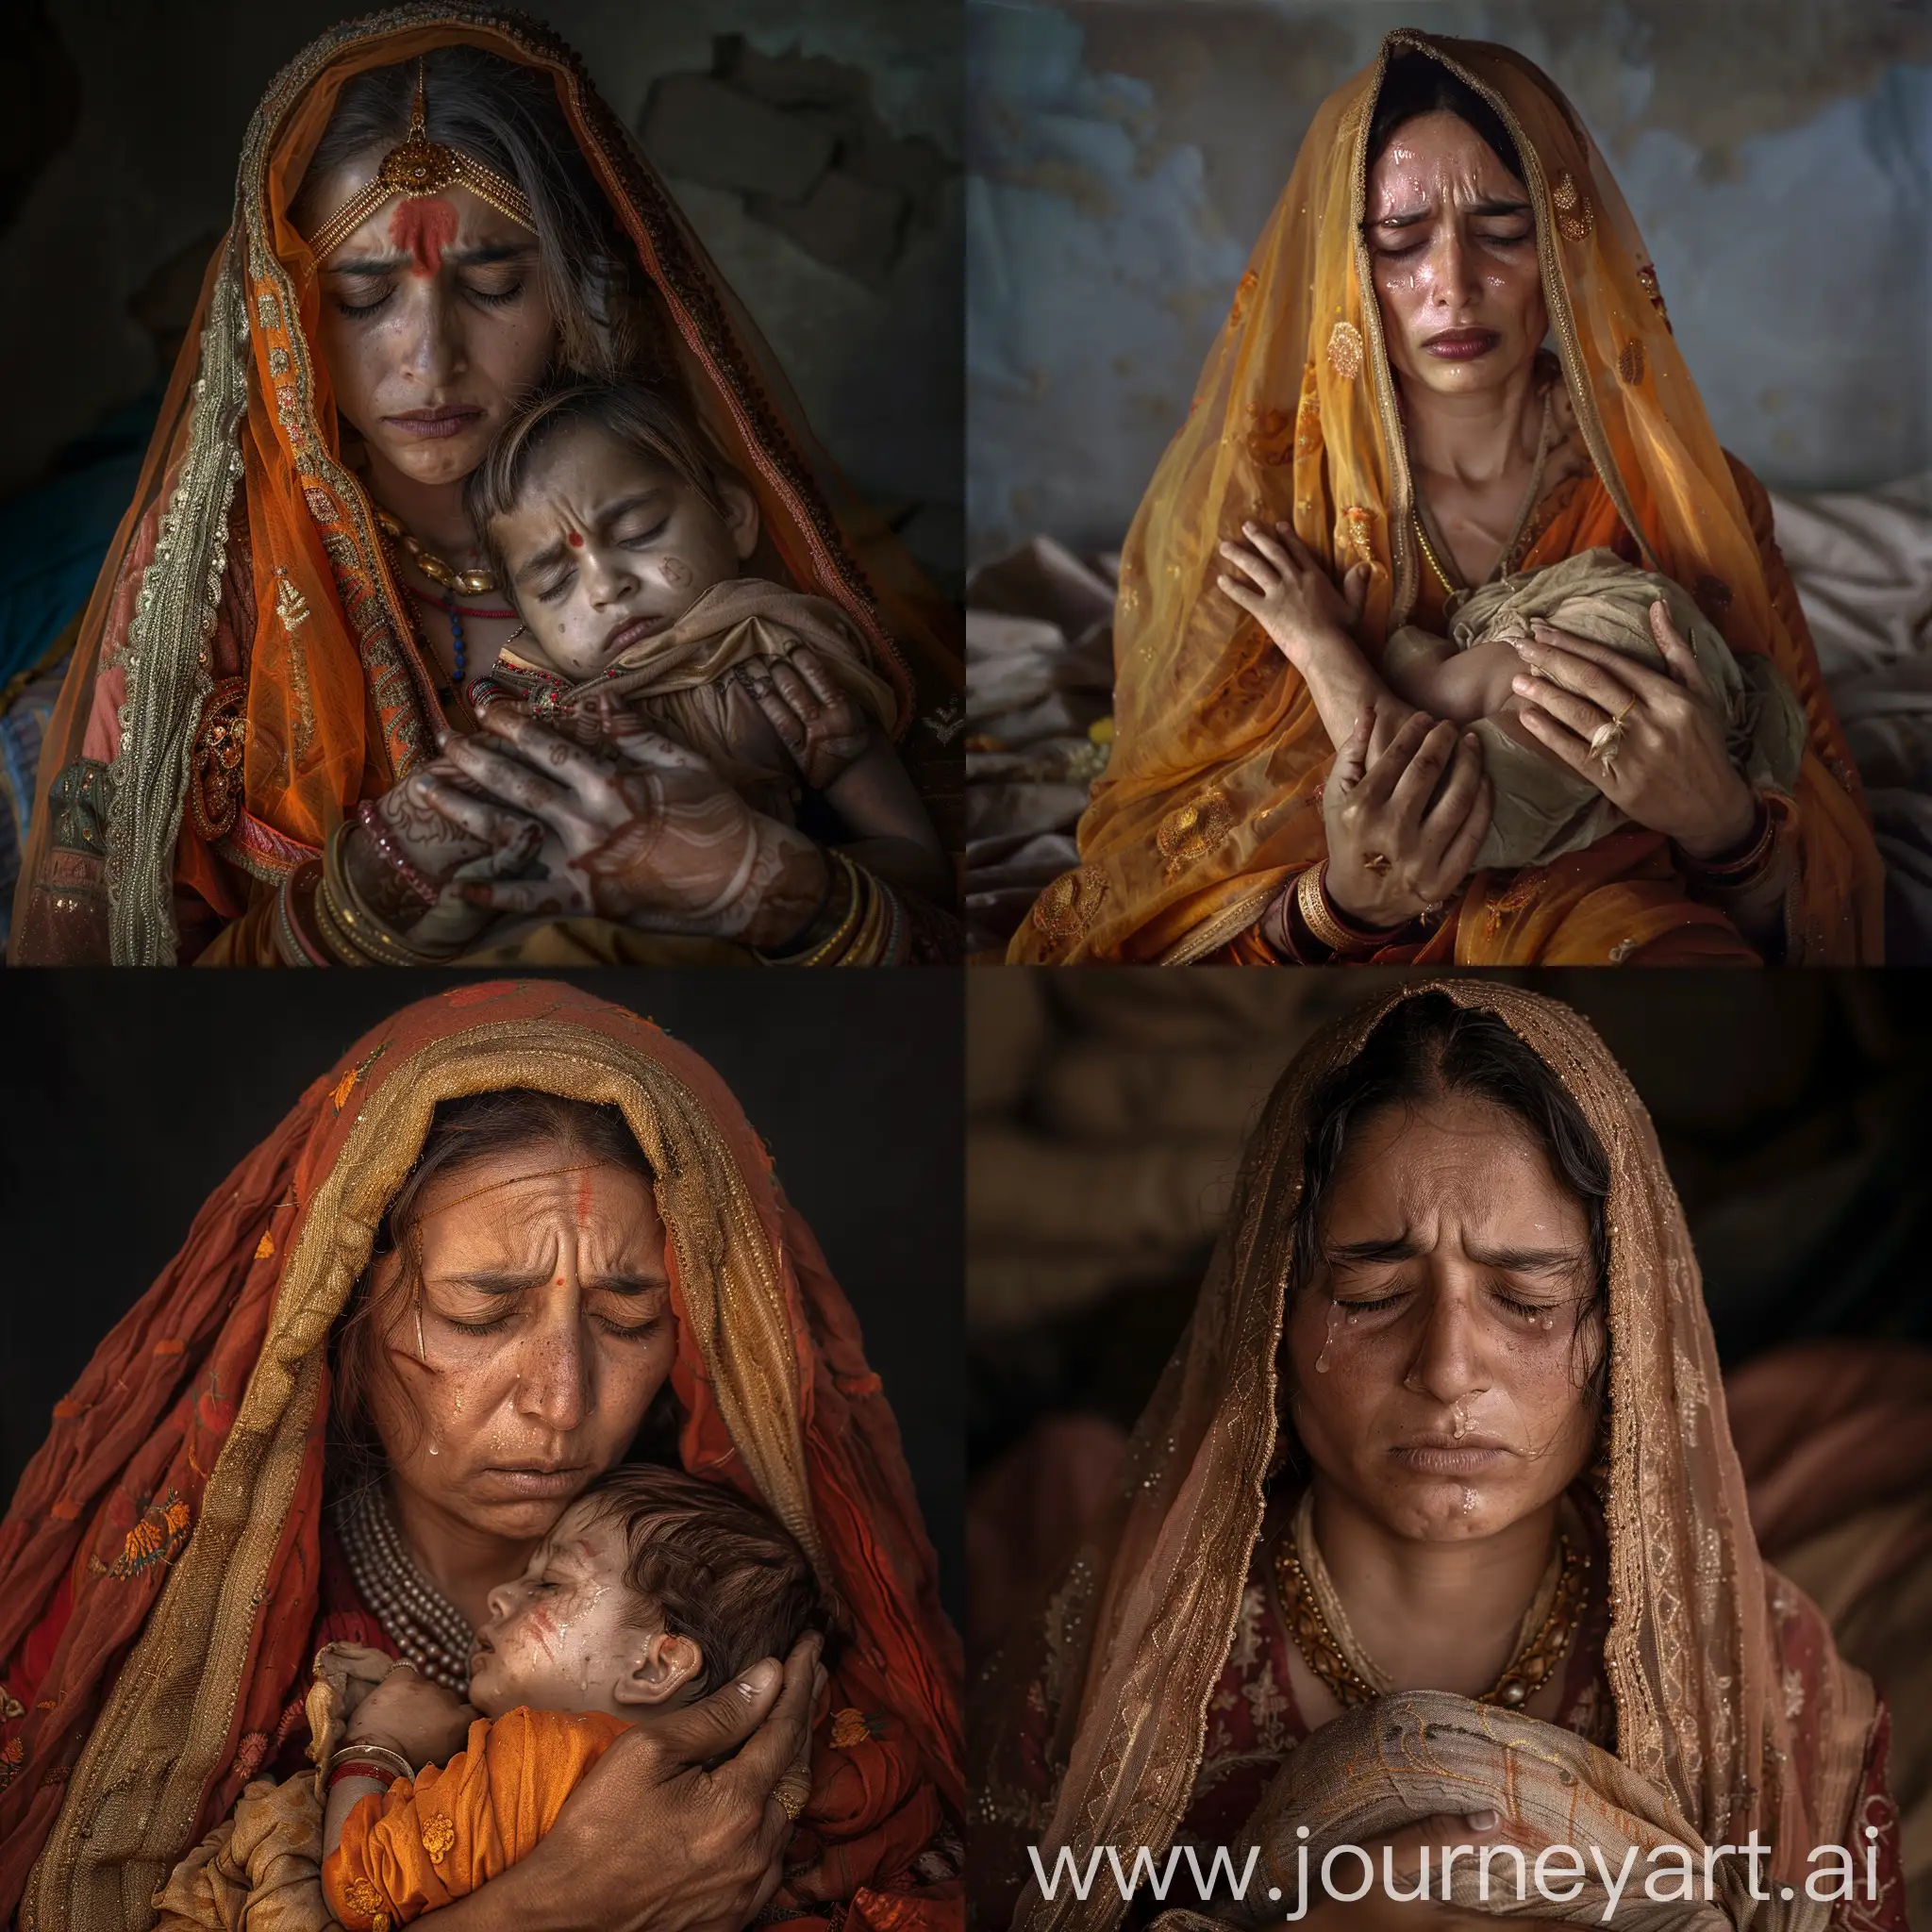 year is 1700 CE. Imagine a rajasthani rajput woman, eyes closed, tears coming out of her eyes. She is holding her  dead child in her arms.